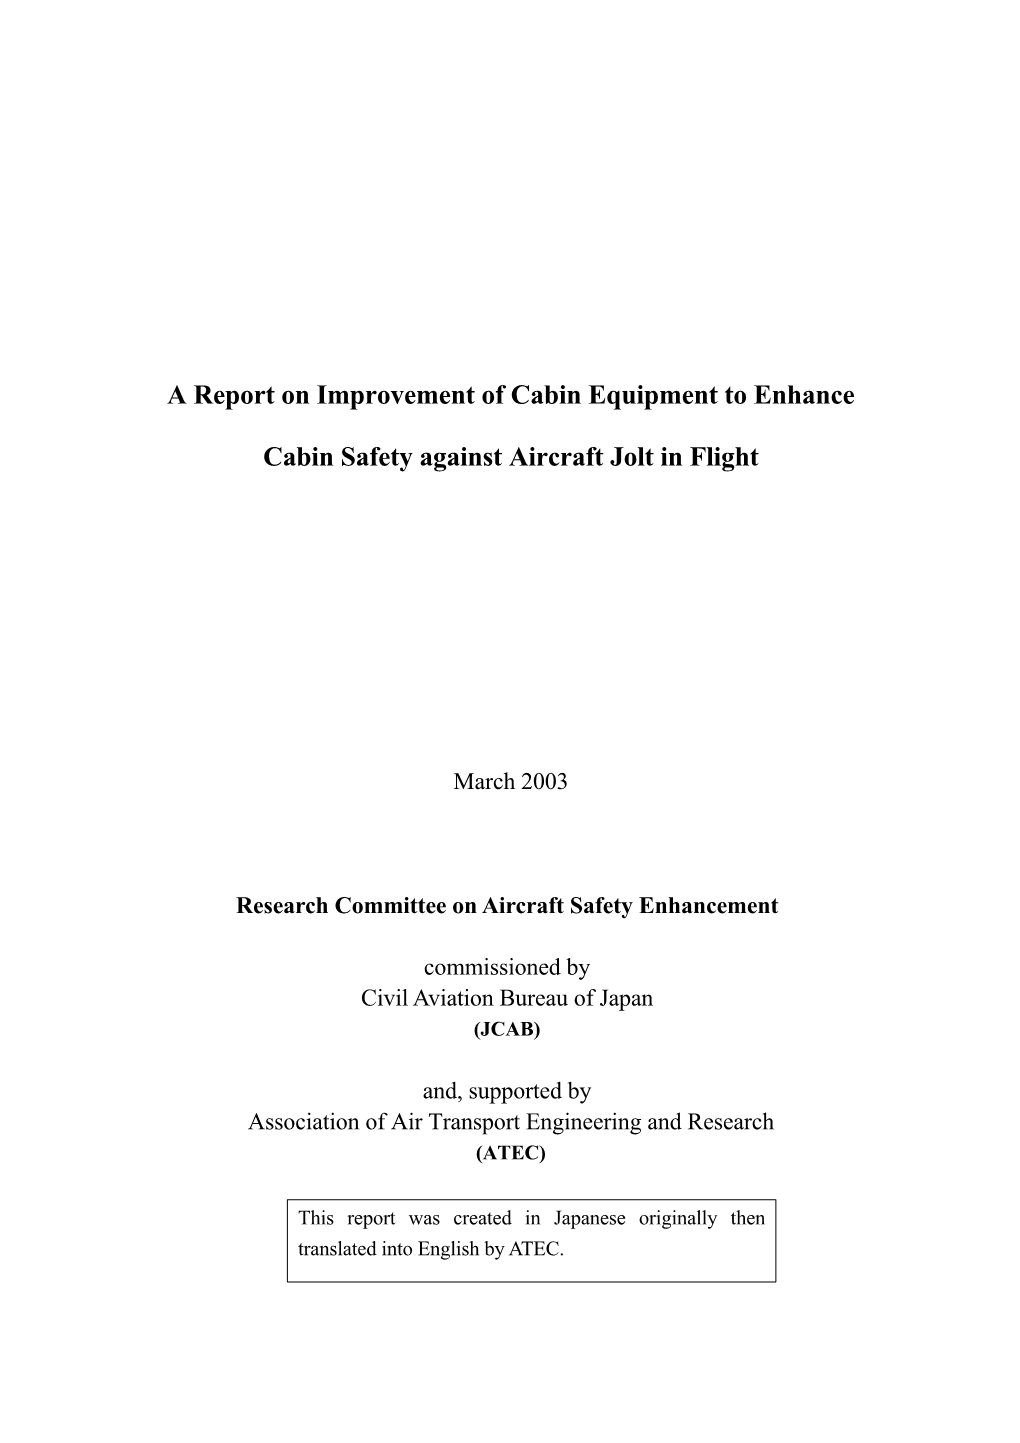 A Report on Improvement of Cabin Equipment to Enhance Cabin